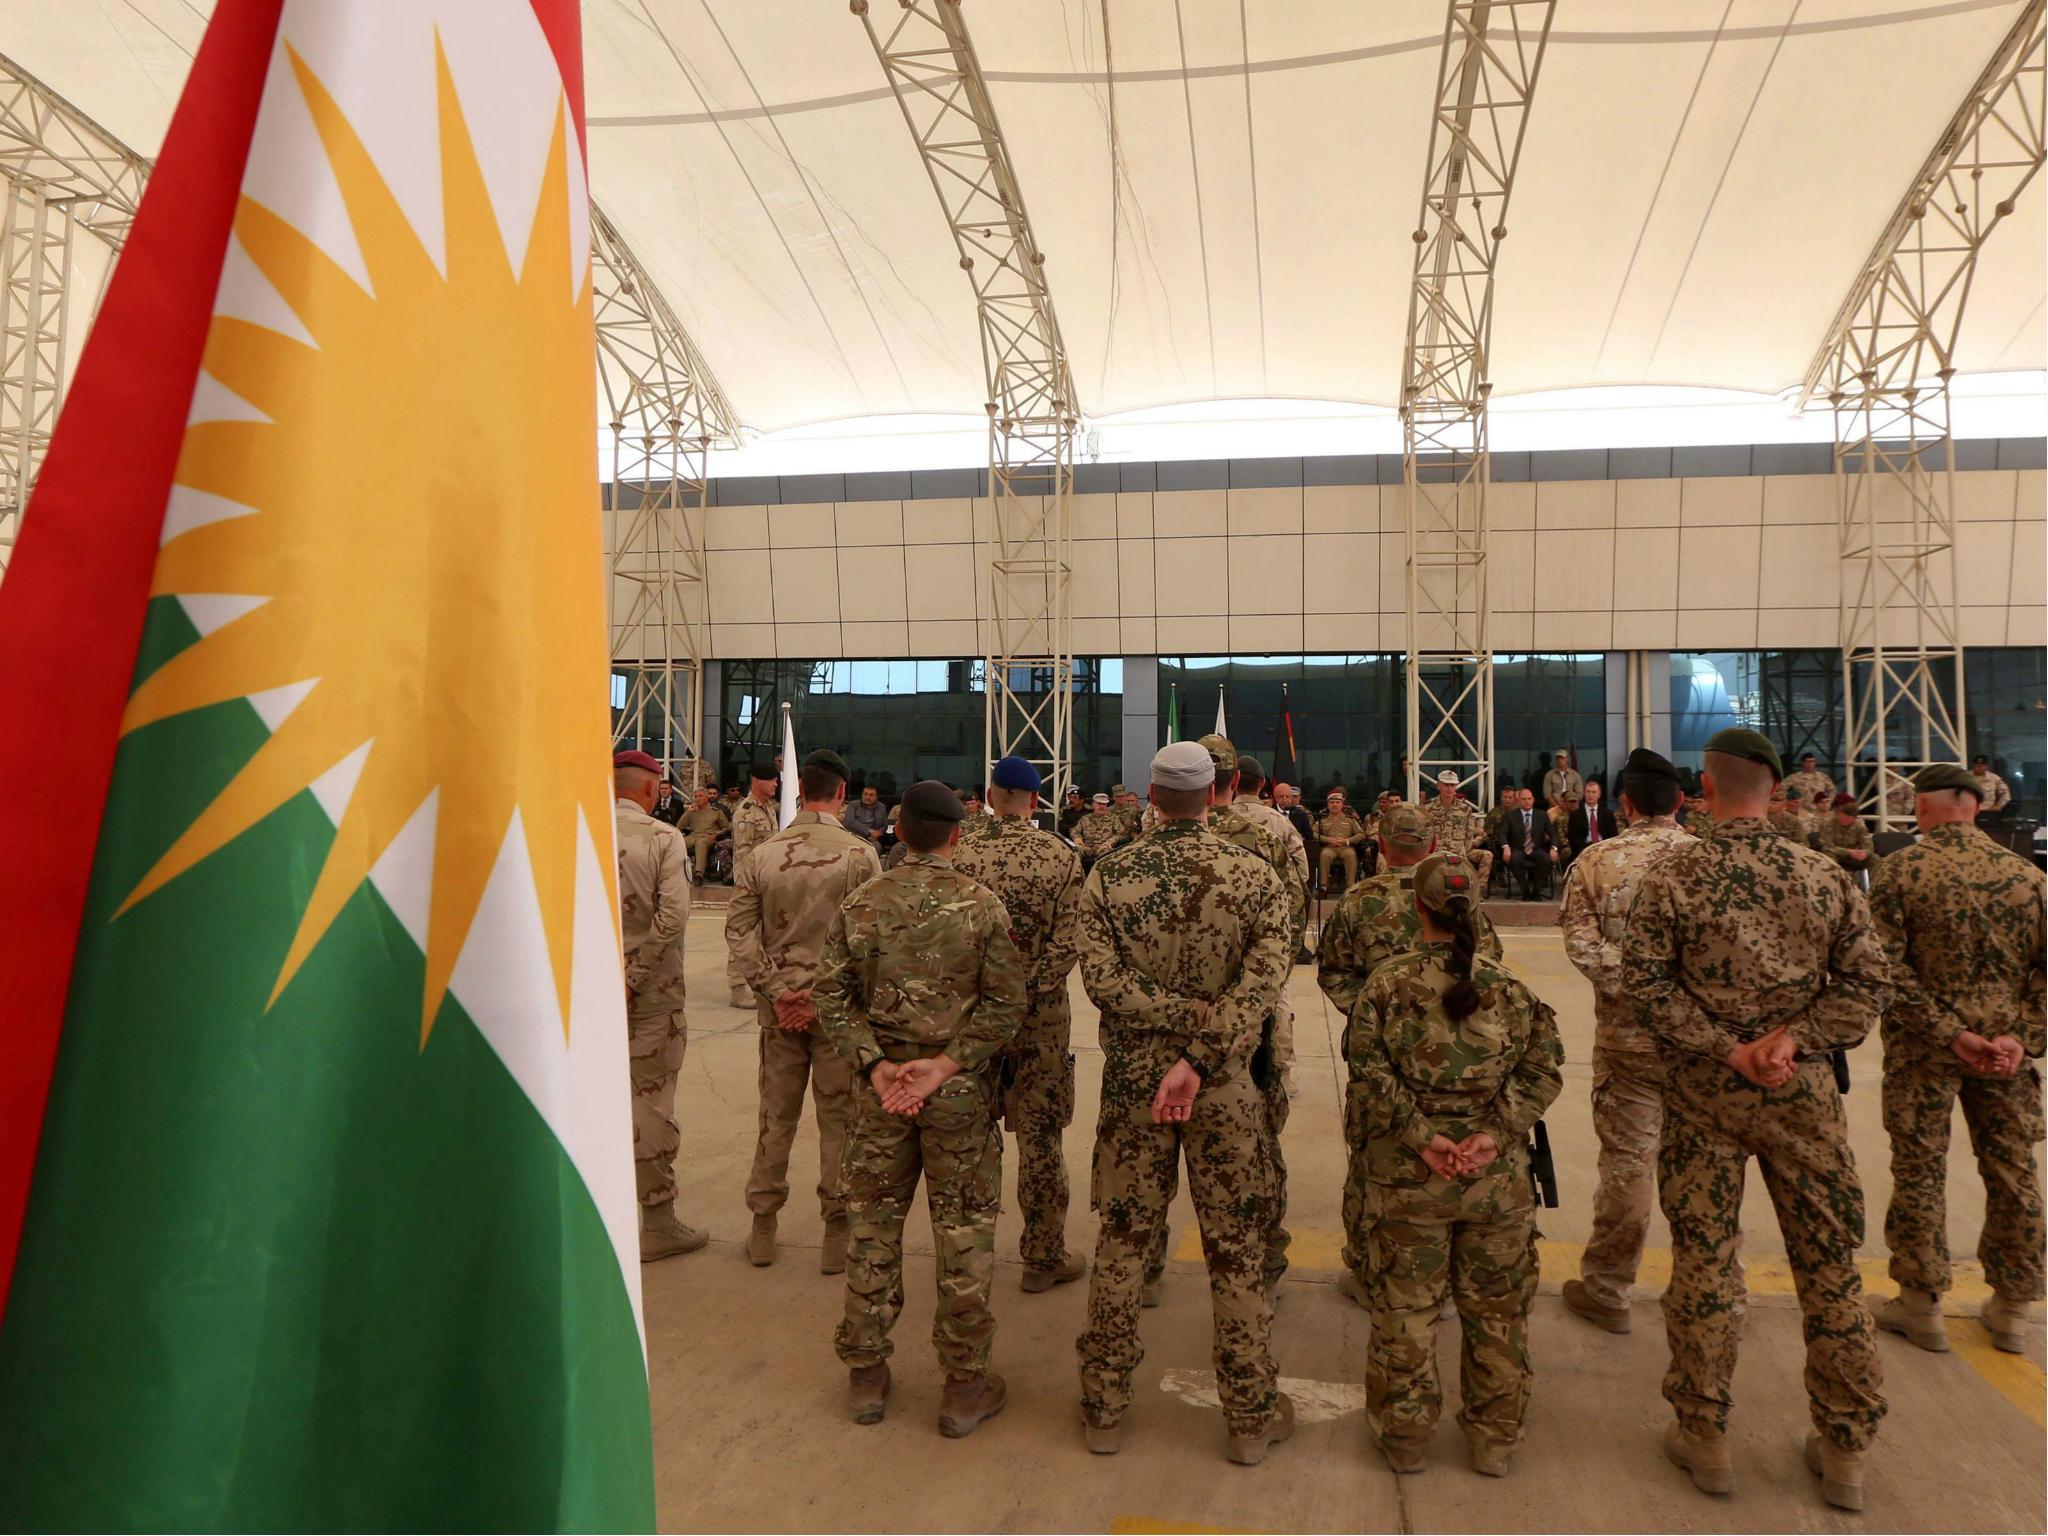 Military advisers from the international coalition forces stand during a transfer of authority ceremony on 15 June 2017 at the Kurdistan Training Coordination Center (KTTC) of Erbil, the capital of the autonomous Kurdish region of northern Iraq.